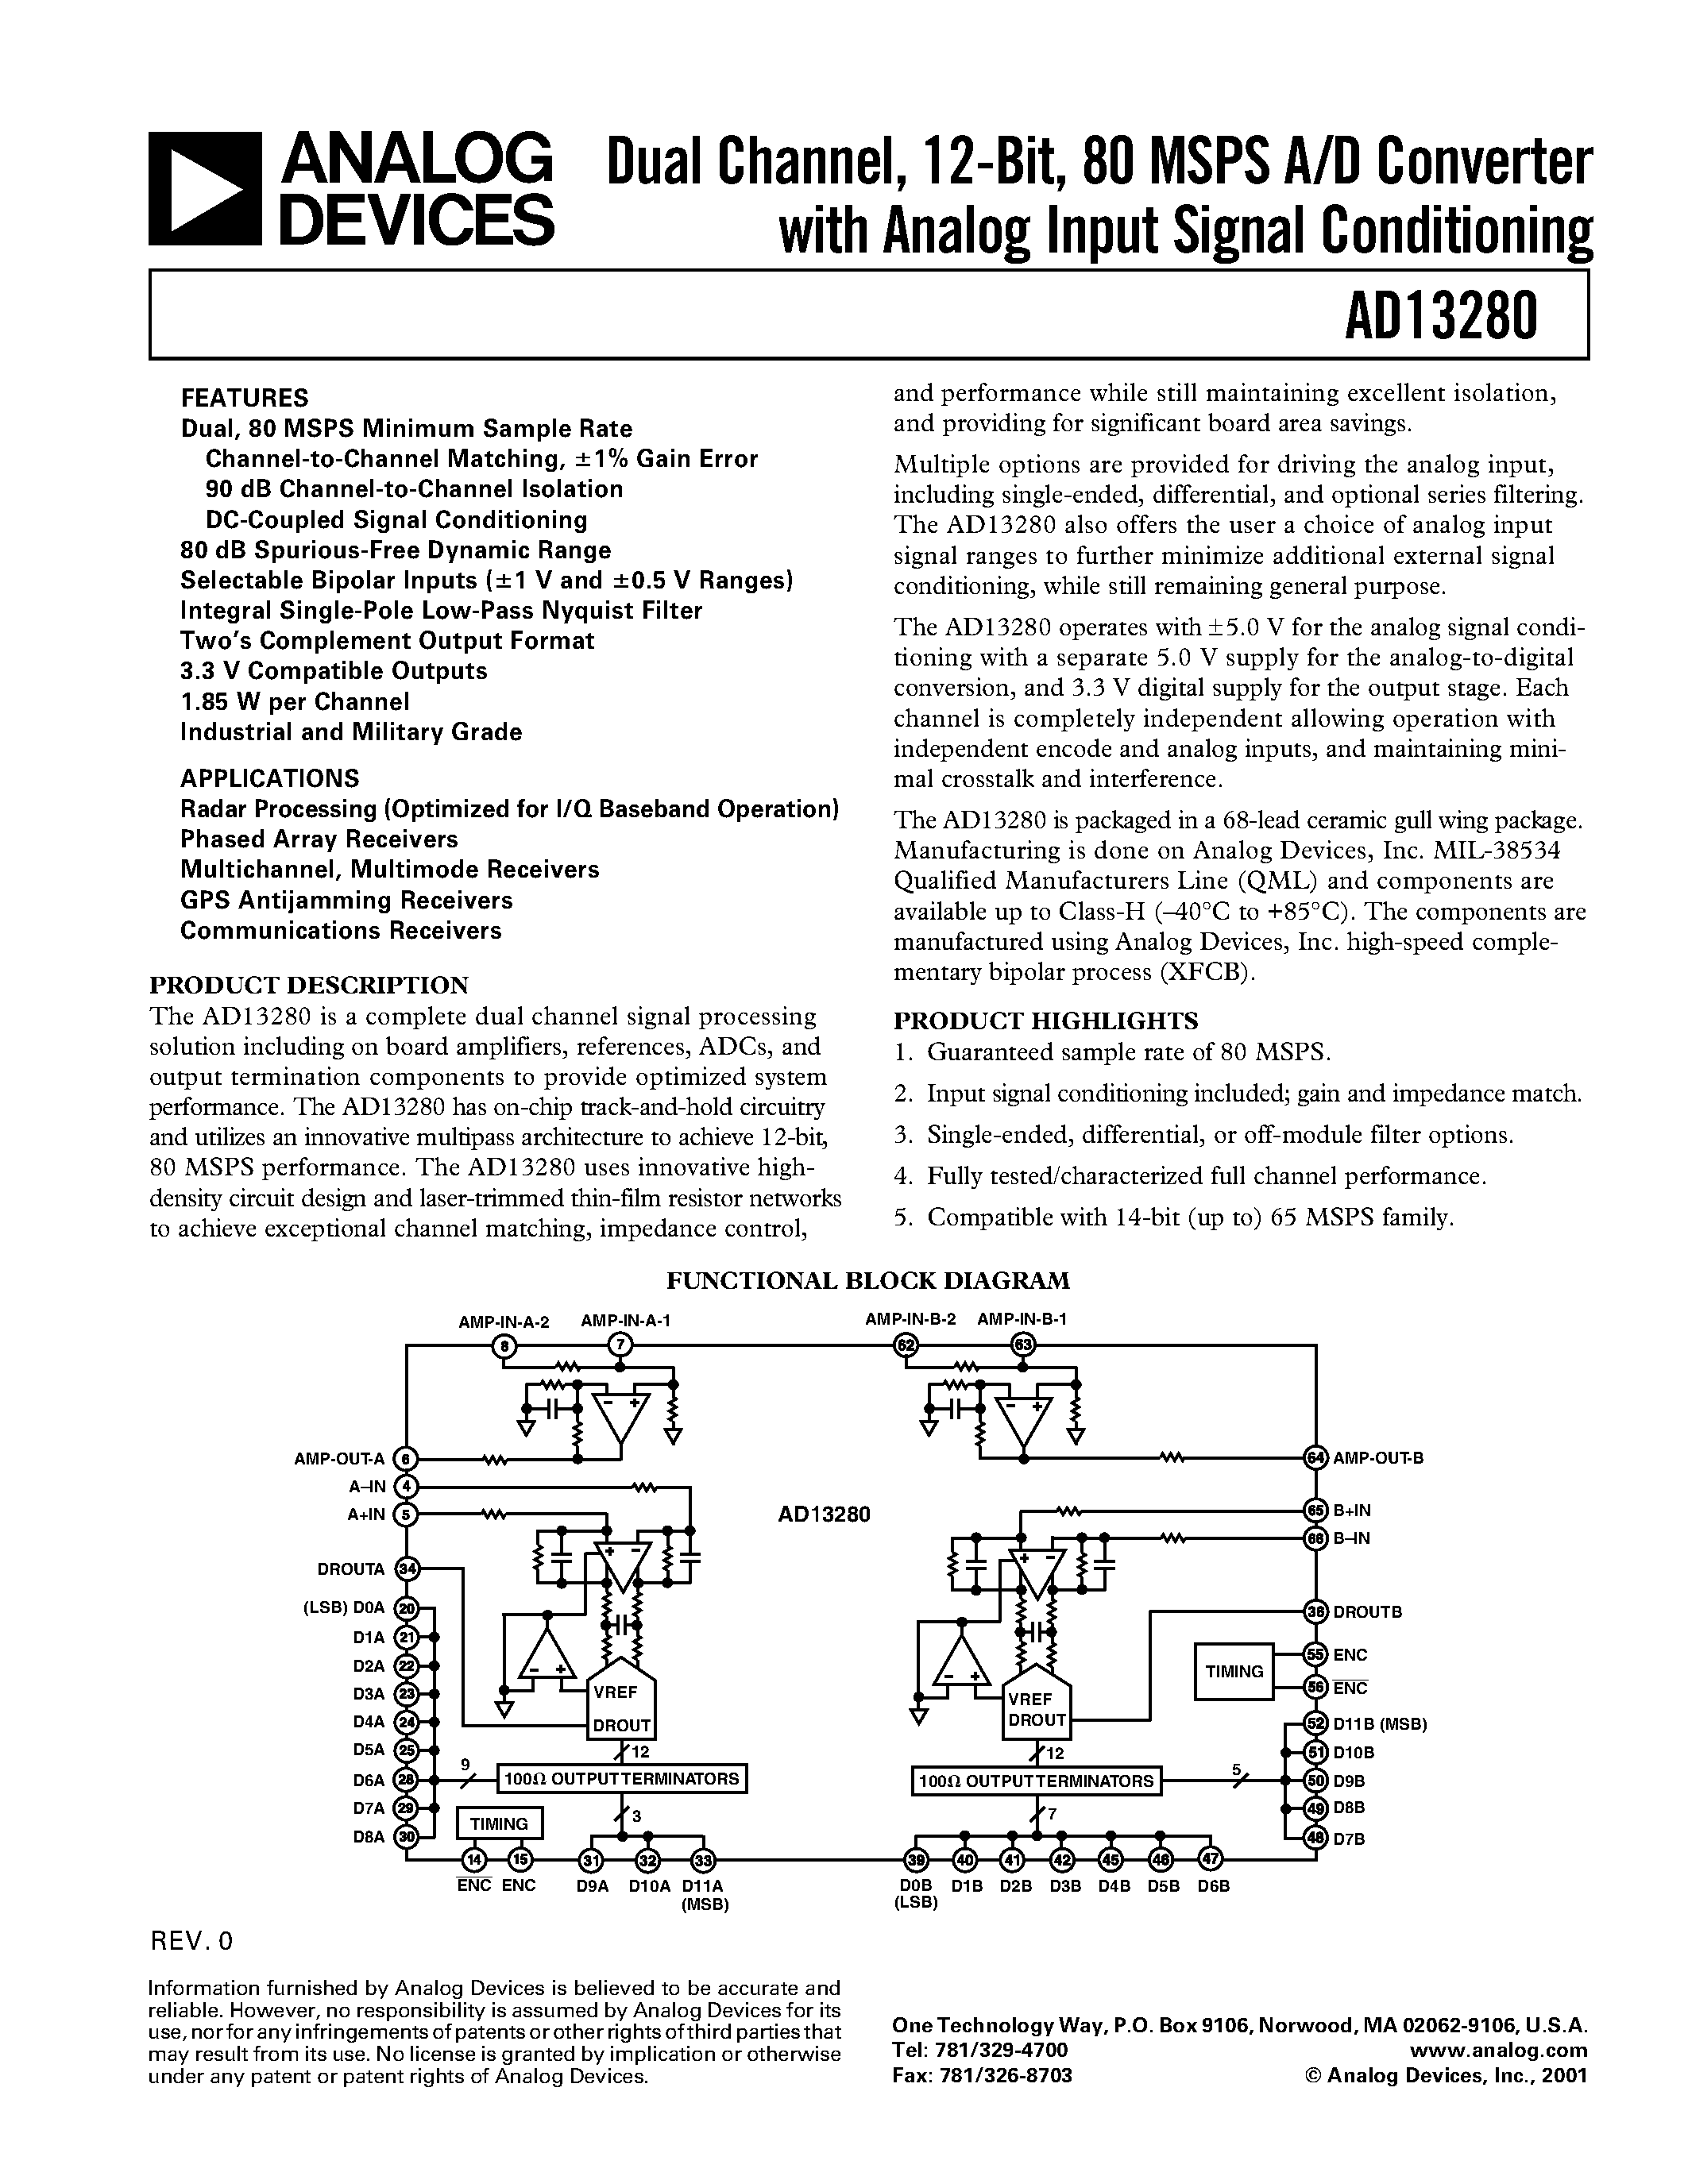 Datasheet AD13280AF - Dual Channel/ 12-Bit/ 80 MSPS A/D Converter with Analog Input Signal Conditioning page 1